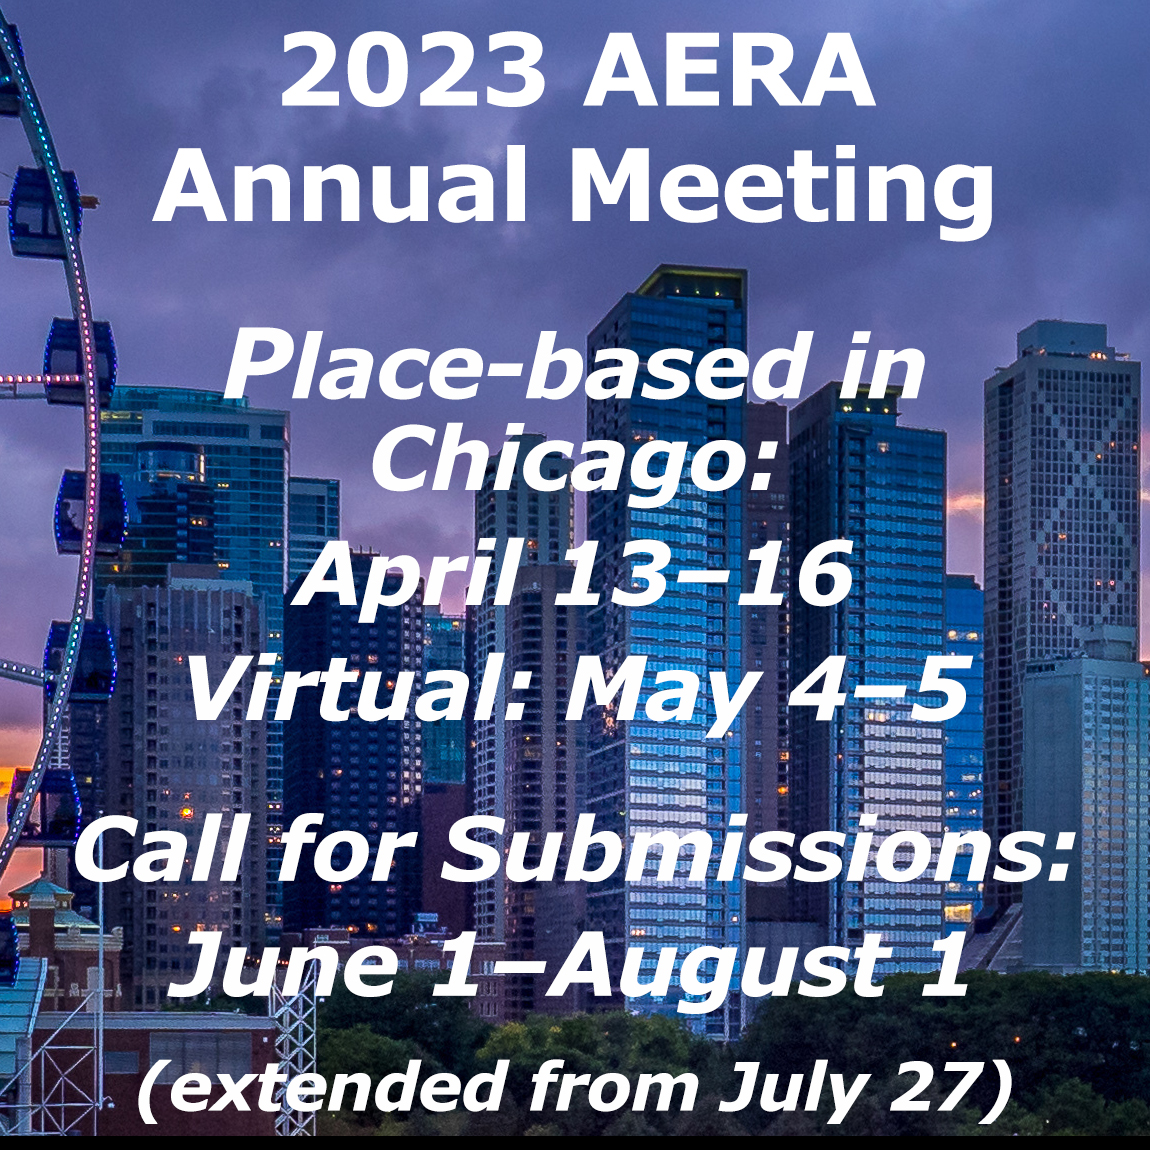 Submissions Deadline for 2023 Annual Meeting Extended to August 1